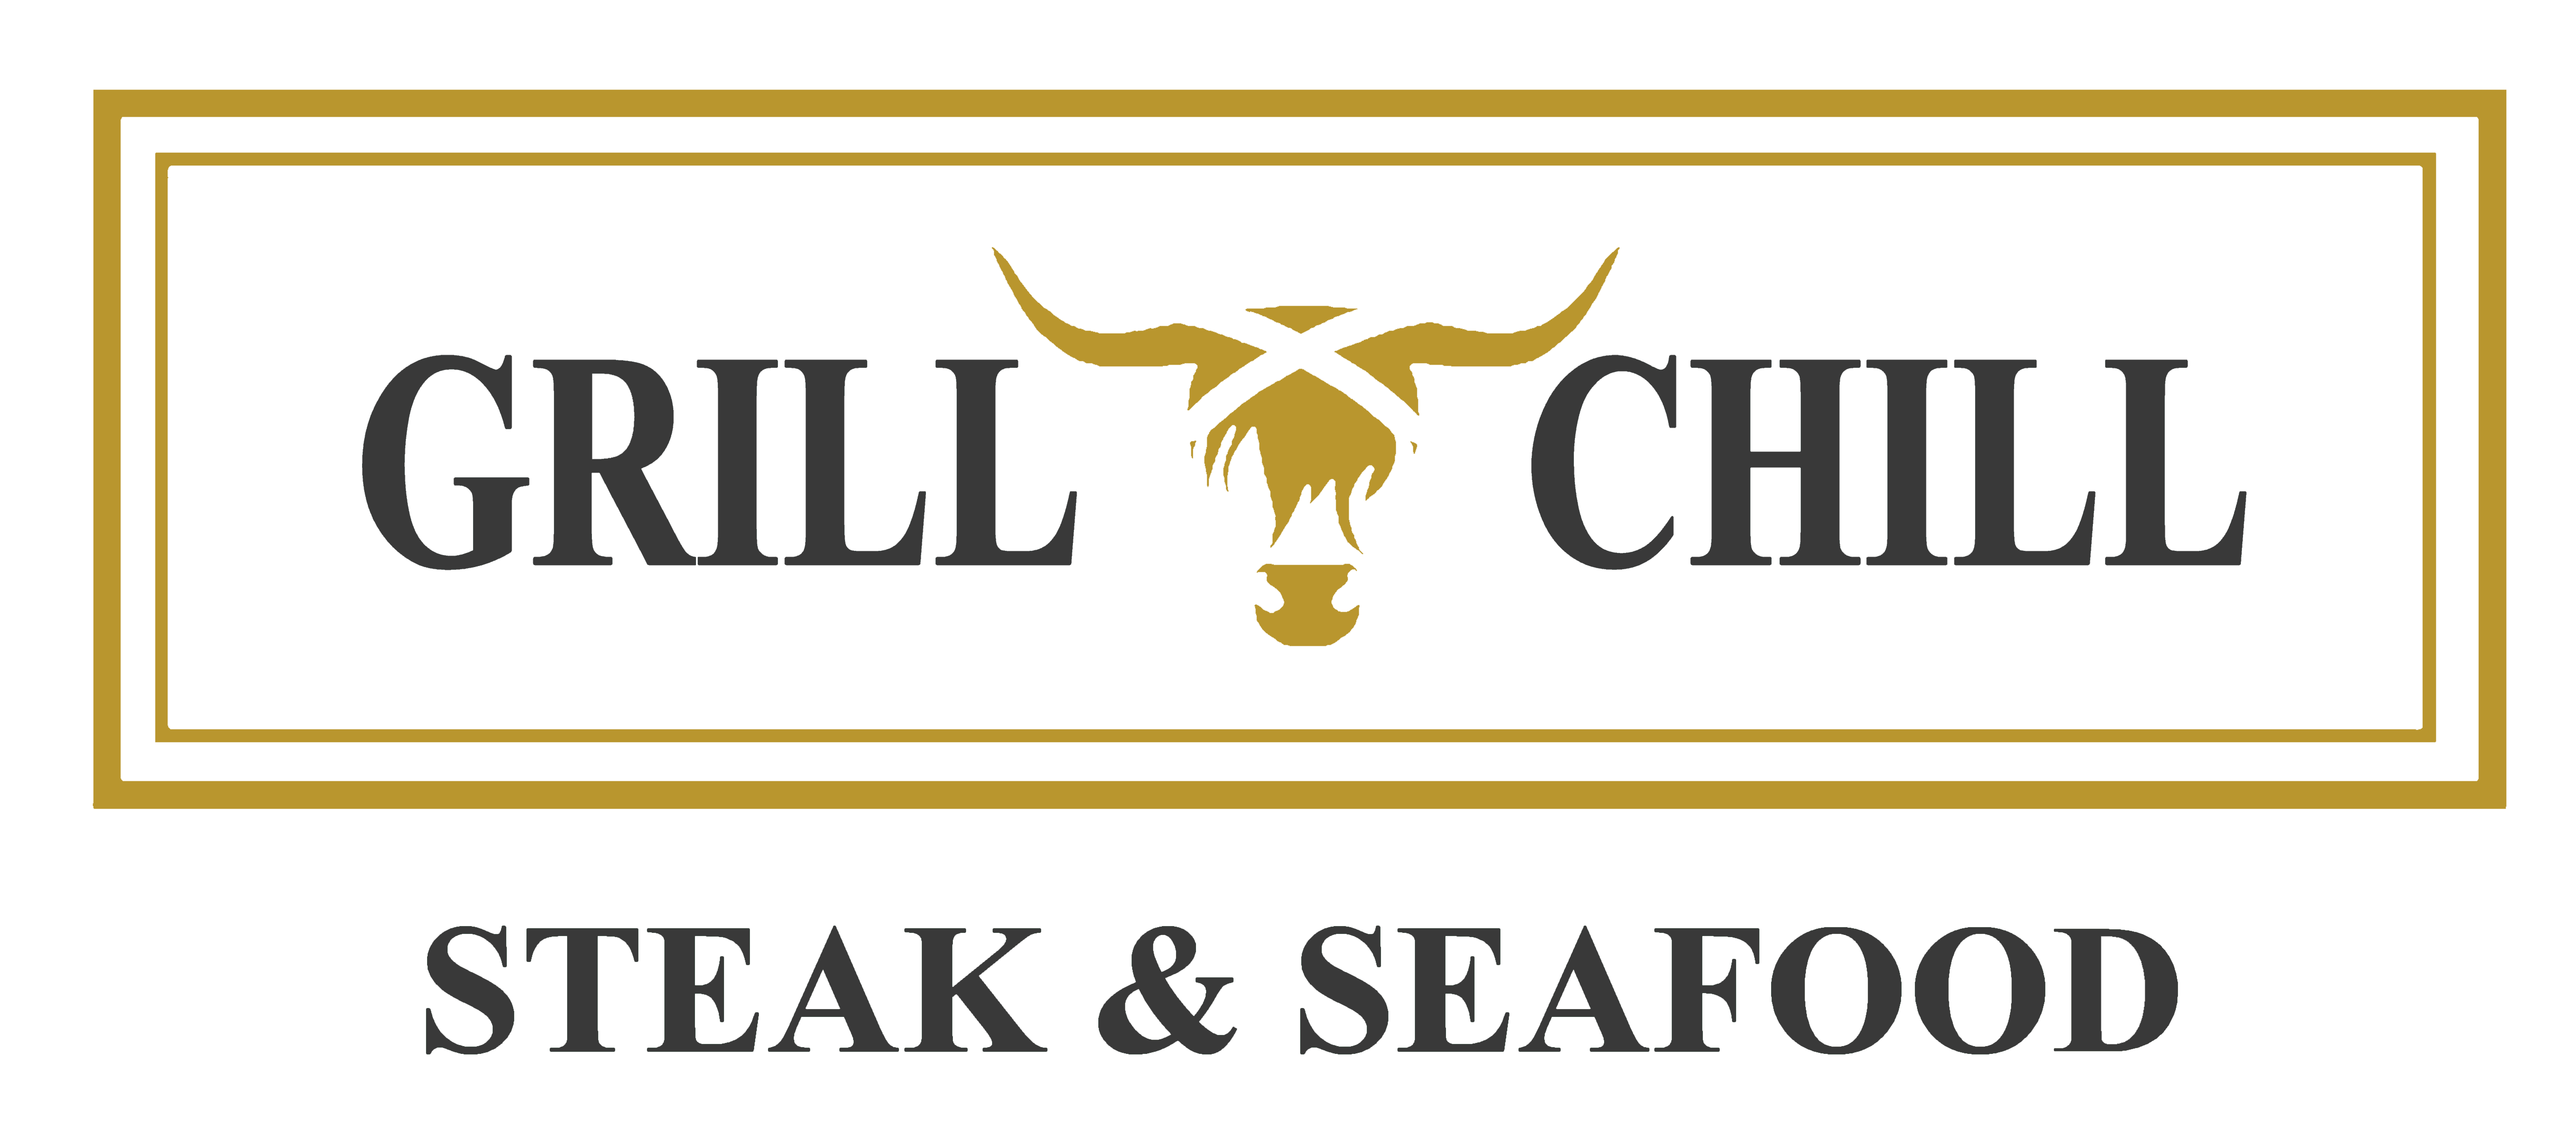 Grill And Chill Steak & Seafood - Art Hotel